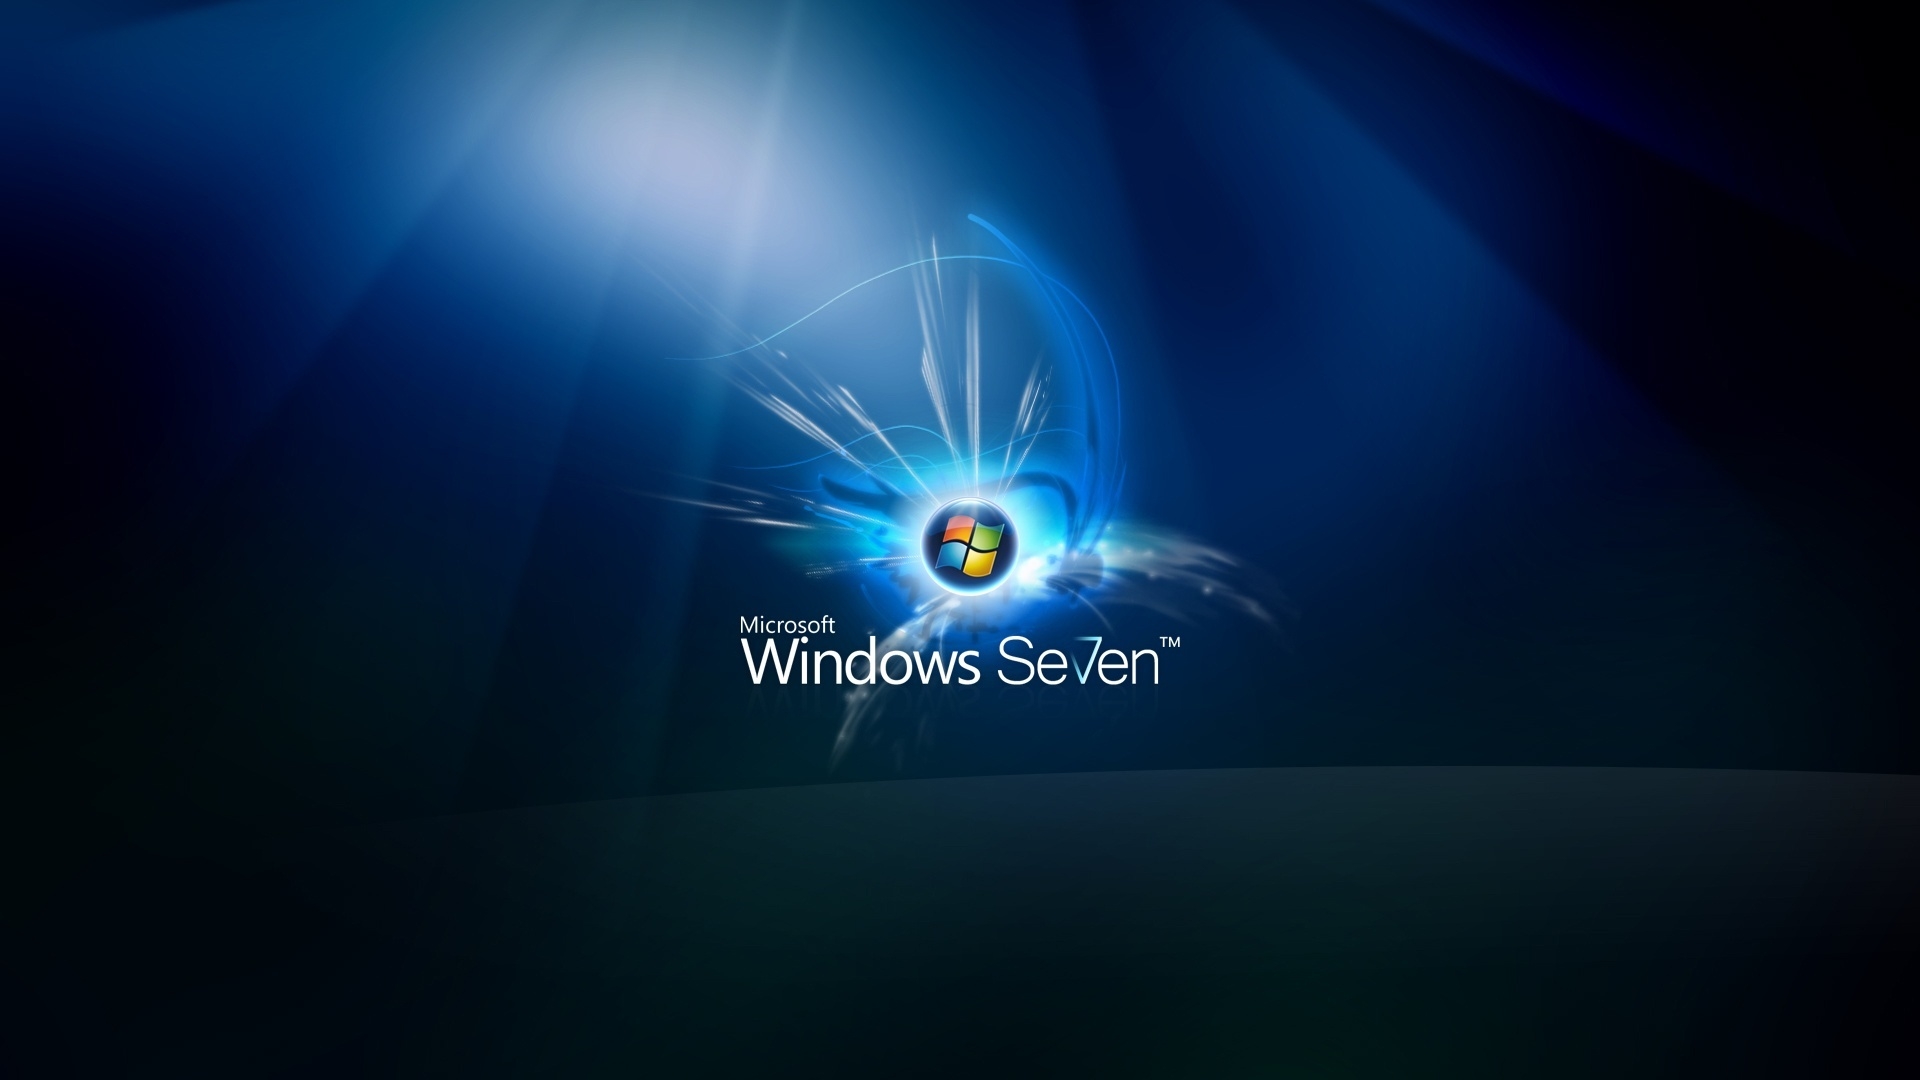 Great Windows Seven for 1920 x 1080 HDTV 1080p resolution